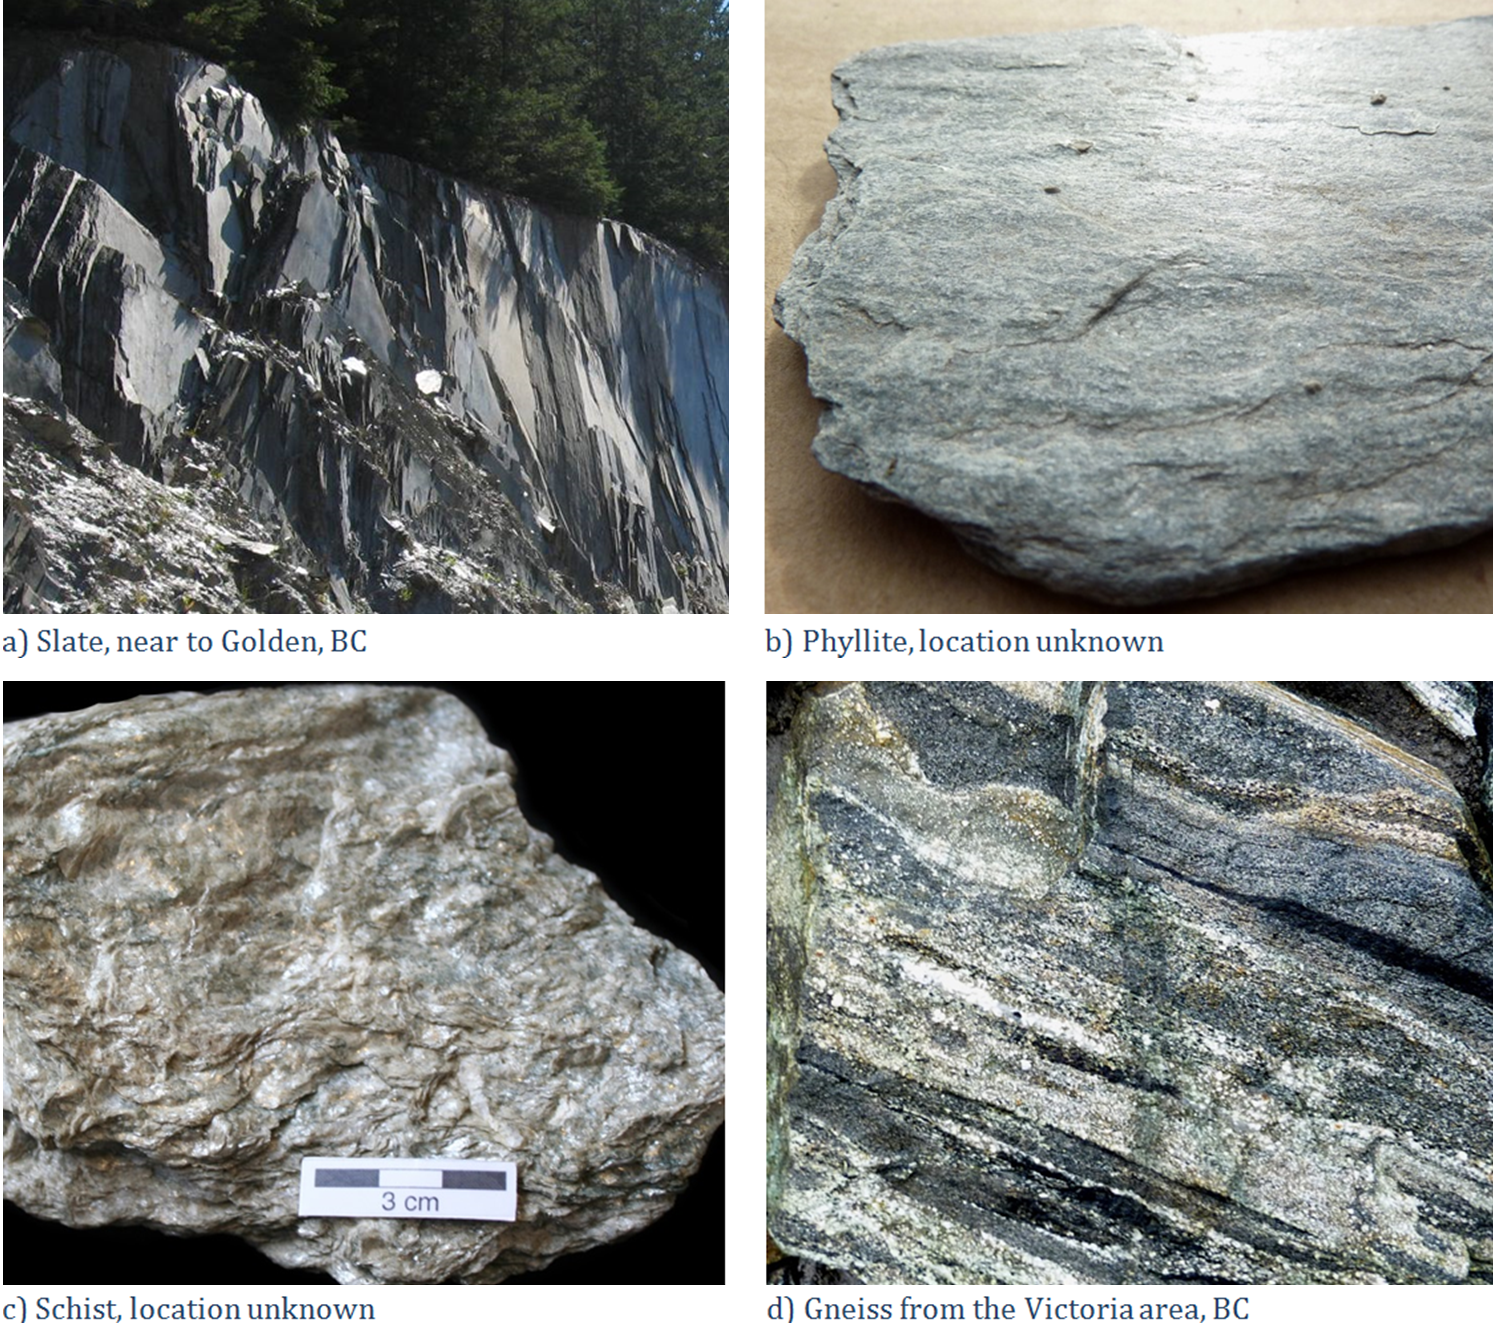 Figure 6.2.4: Examples of foliated metamorphic rocks: (A) Slate, (B) Phyllite, (C) Schist, (D) Gneiss.